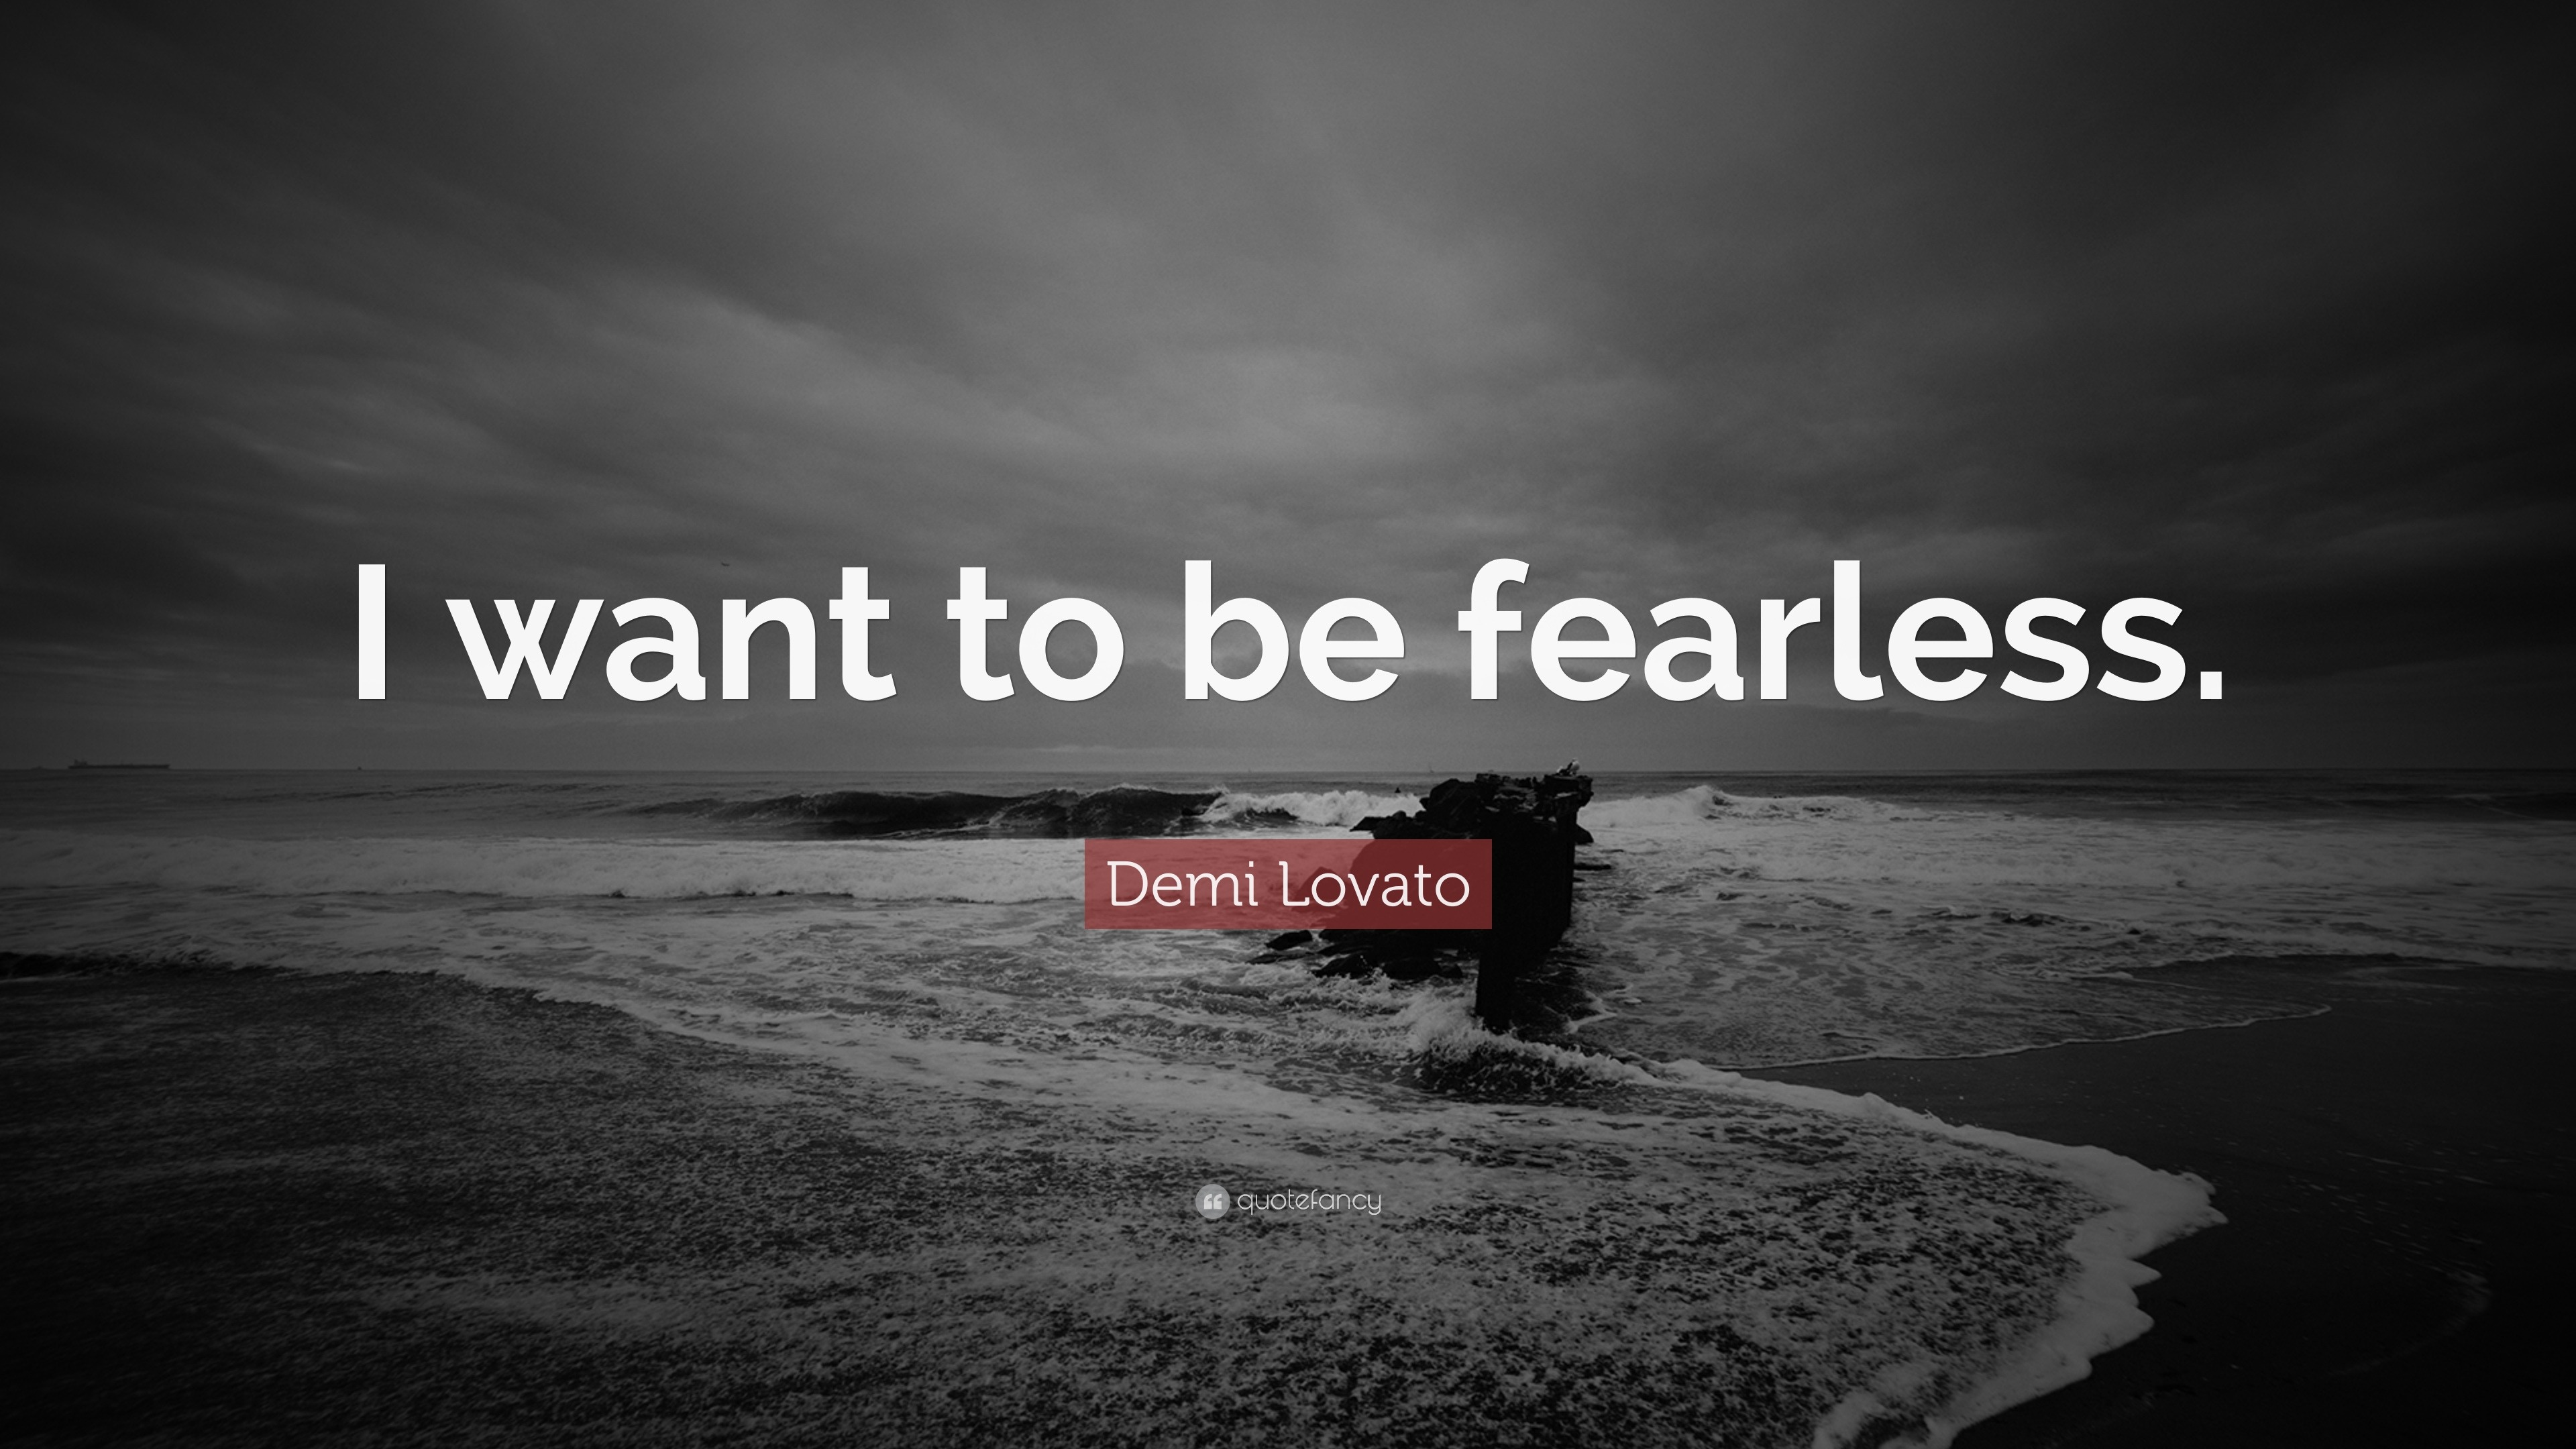 https://quotefancy.com/media/wallpaper/3840x2160/63328-Demi-Lovato-Quote-I-want-to-be-fearless.jpg